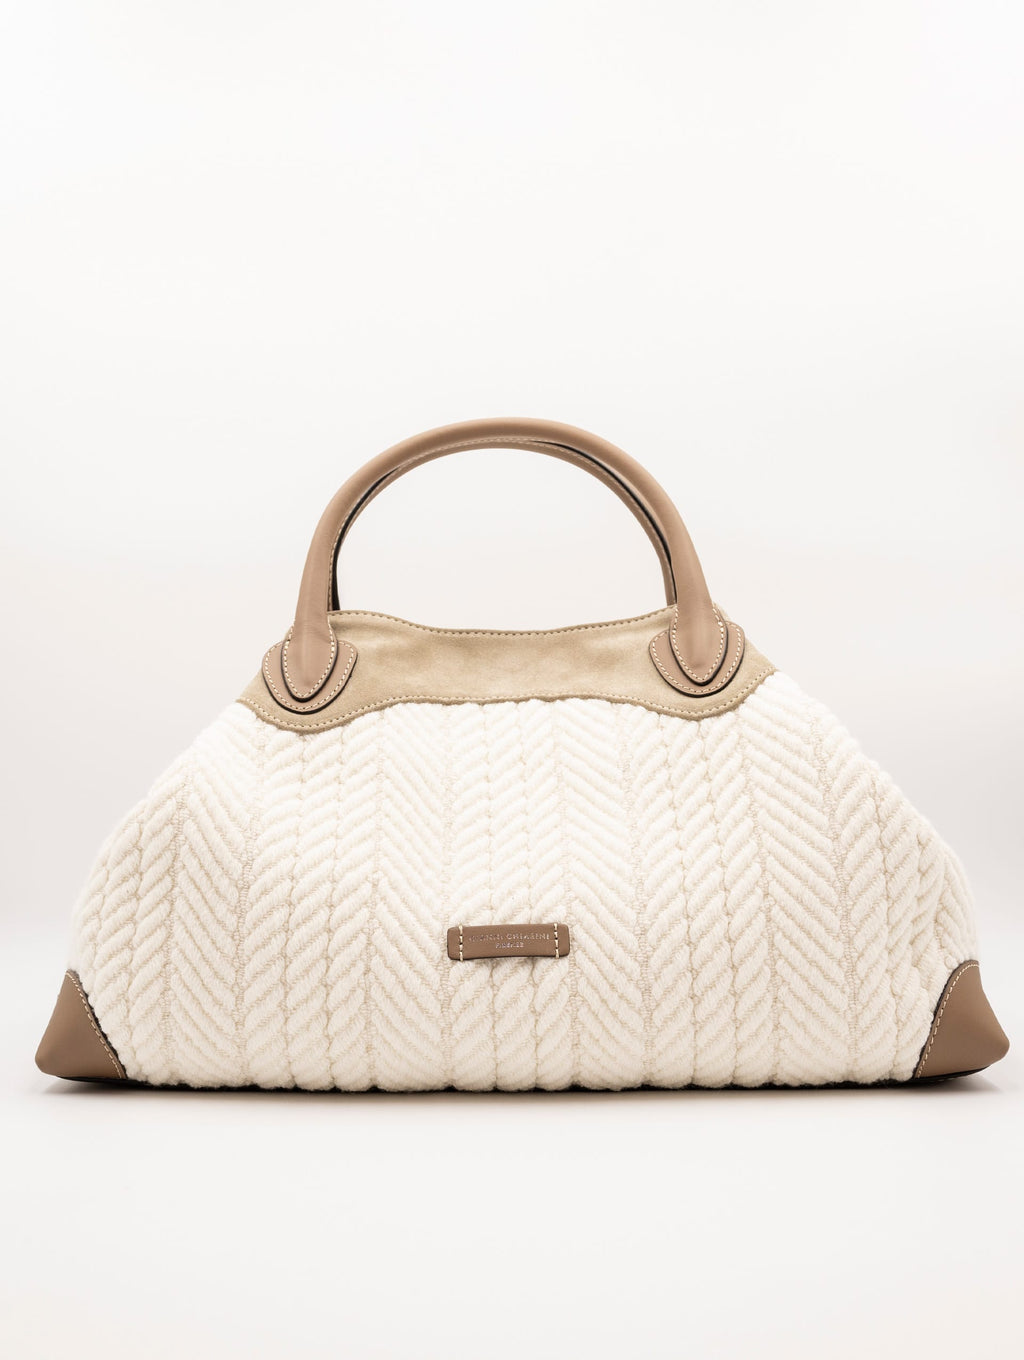 Judy Gianni Chiarini Bag in Cream and Taupe Fabric and Suede | Four Stroke